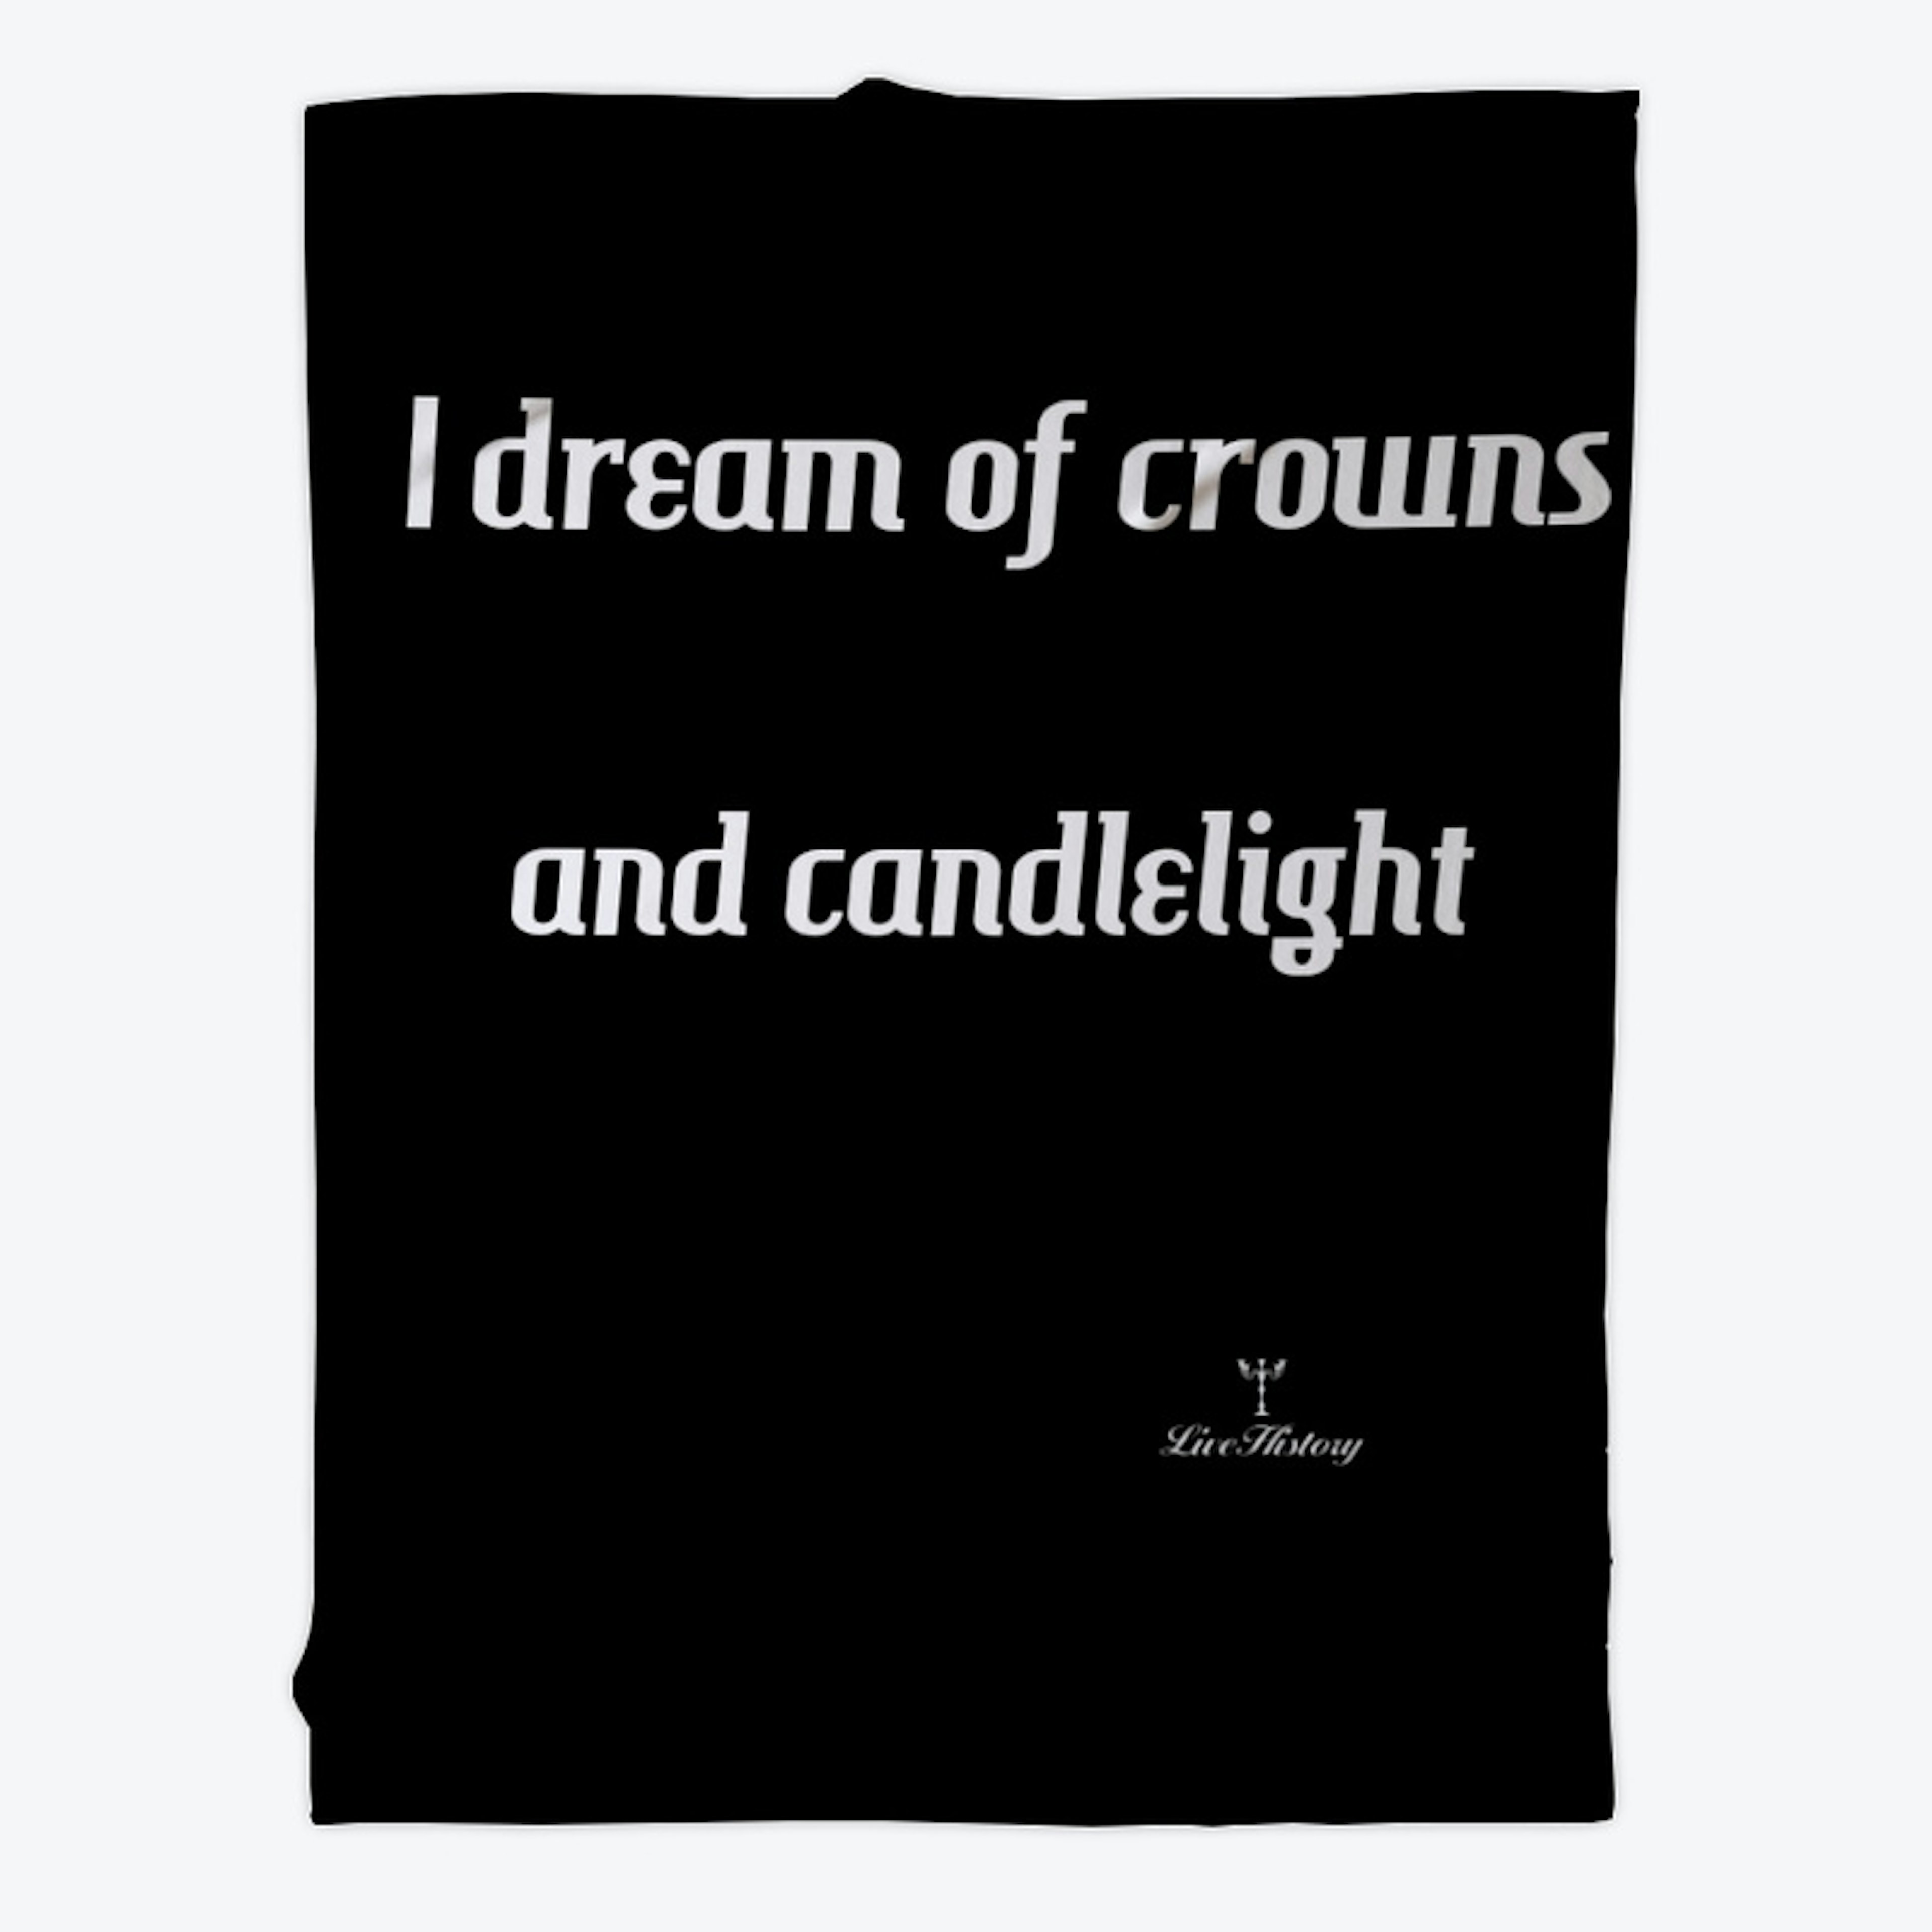 I dream of crowns and candlelight